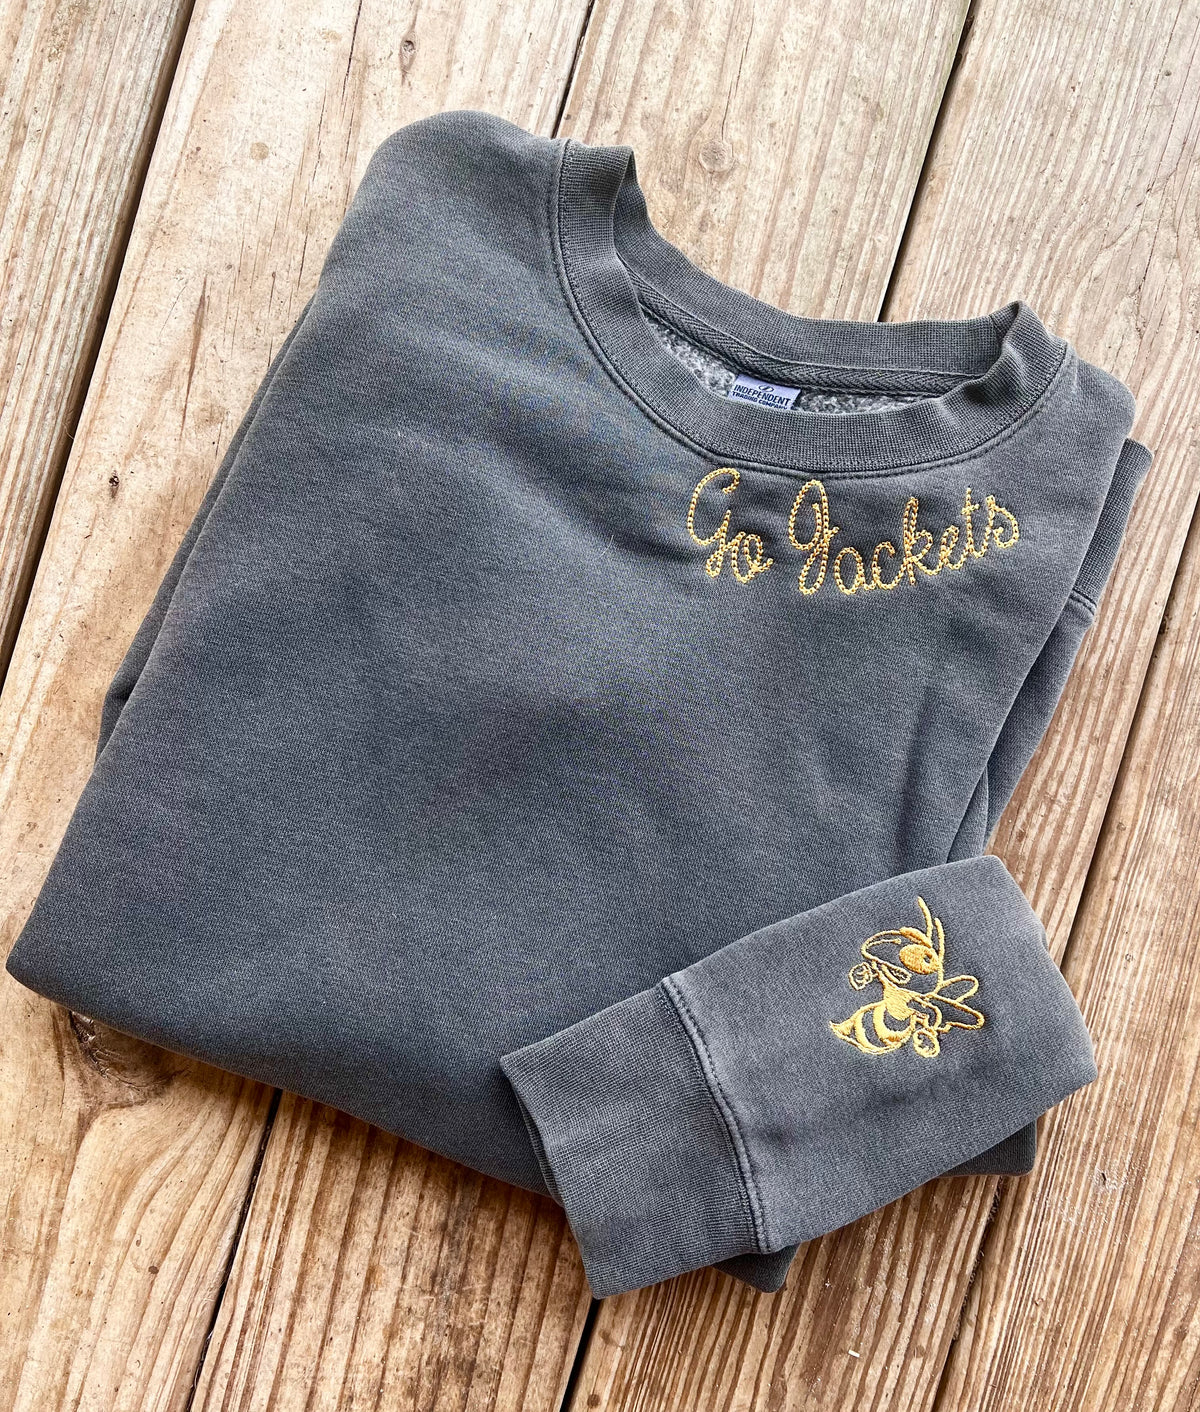 Go Jackets Embroidered Pigment Dyed Sweatshirt PRE-ORDER